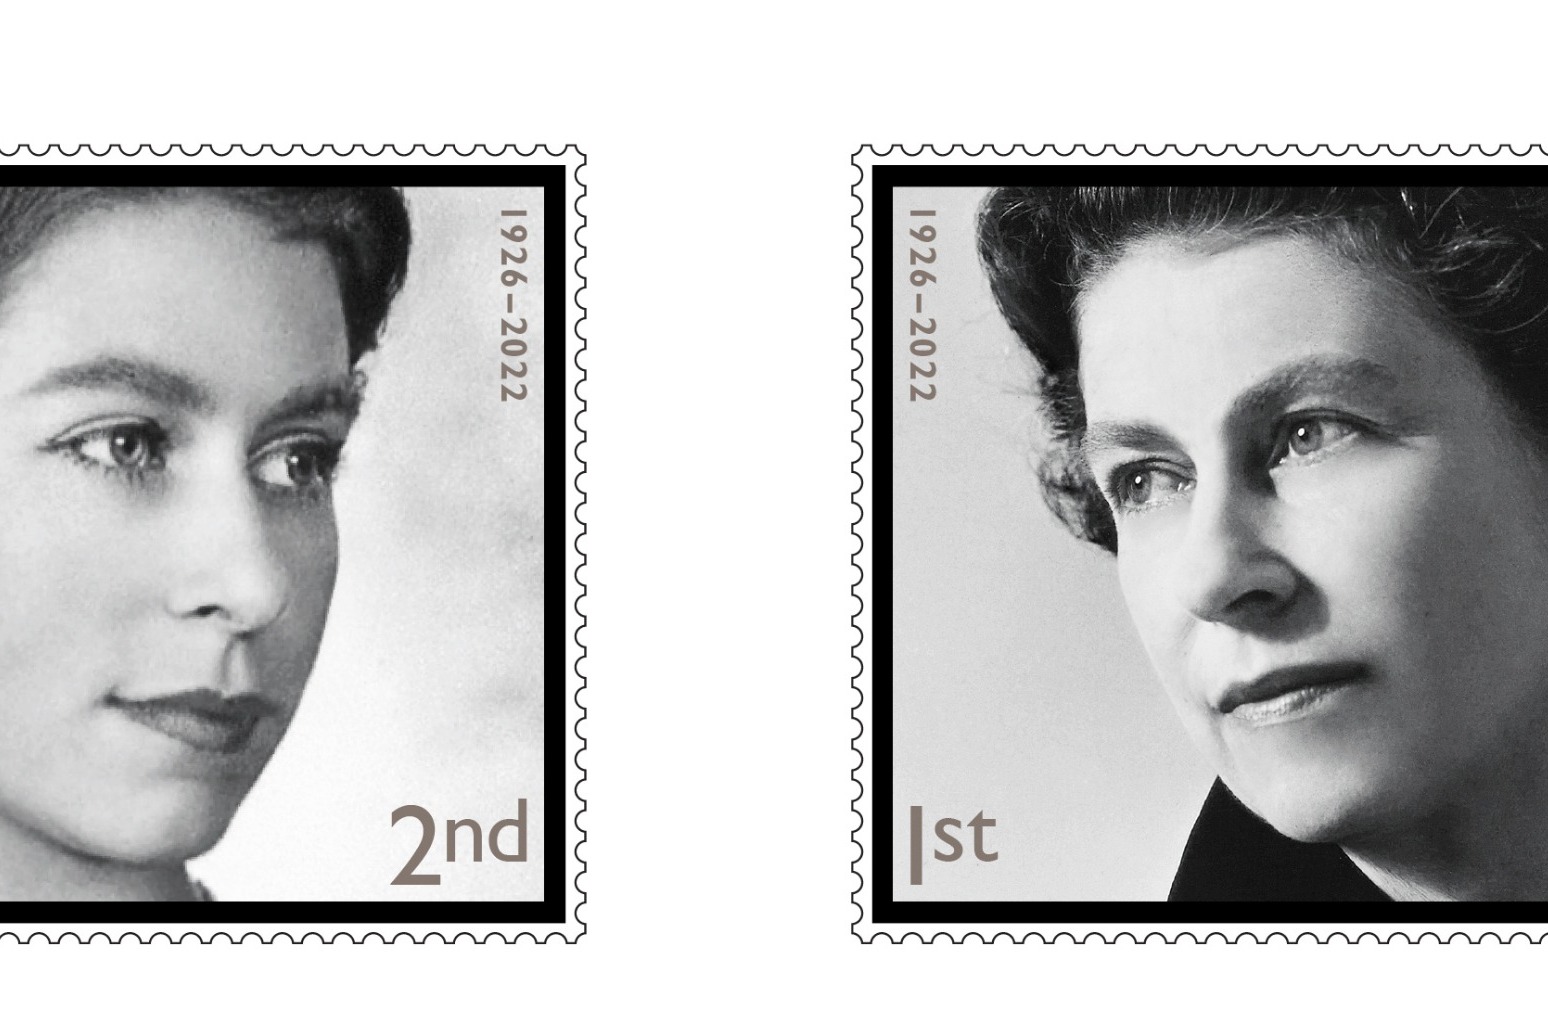 Special stamps to be released in memory of the Queen 